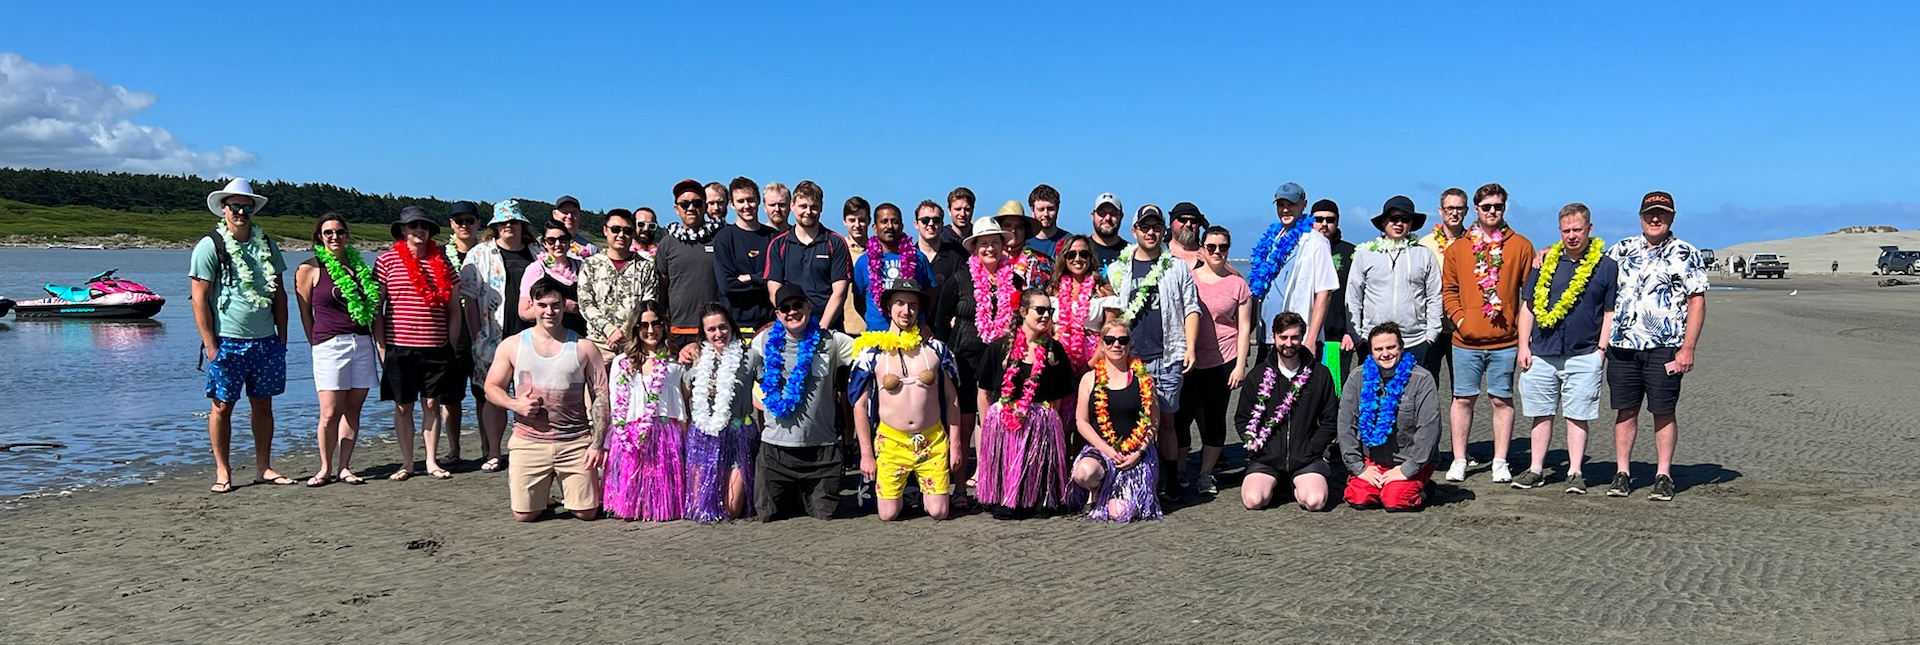 The SeedSpider and FrogParking Team photo at the beach.